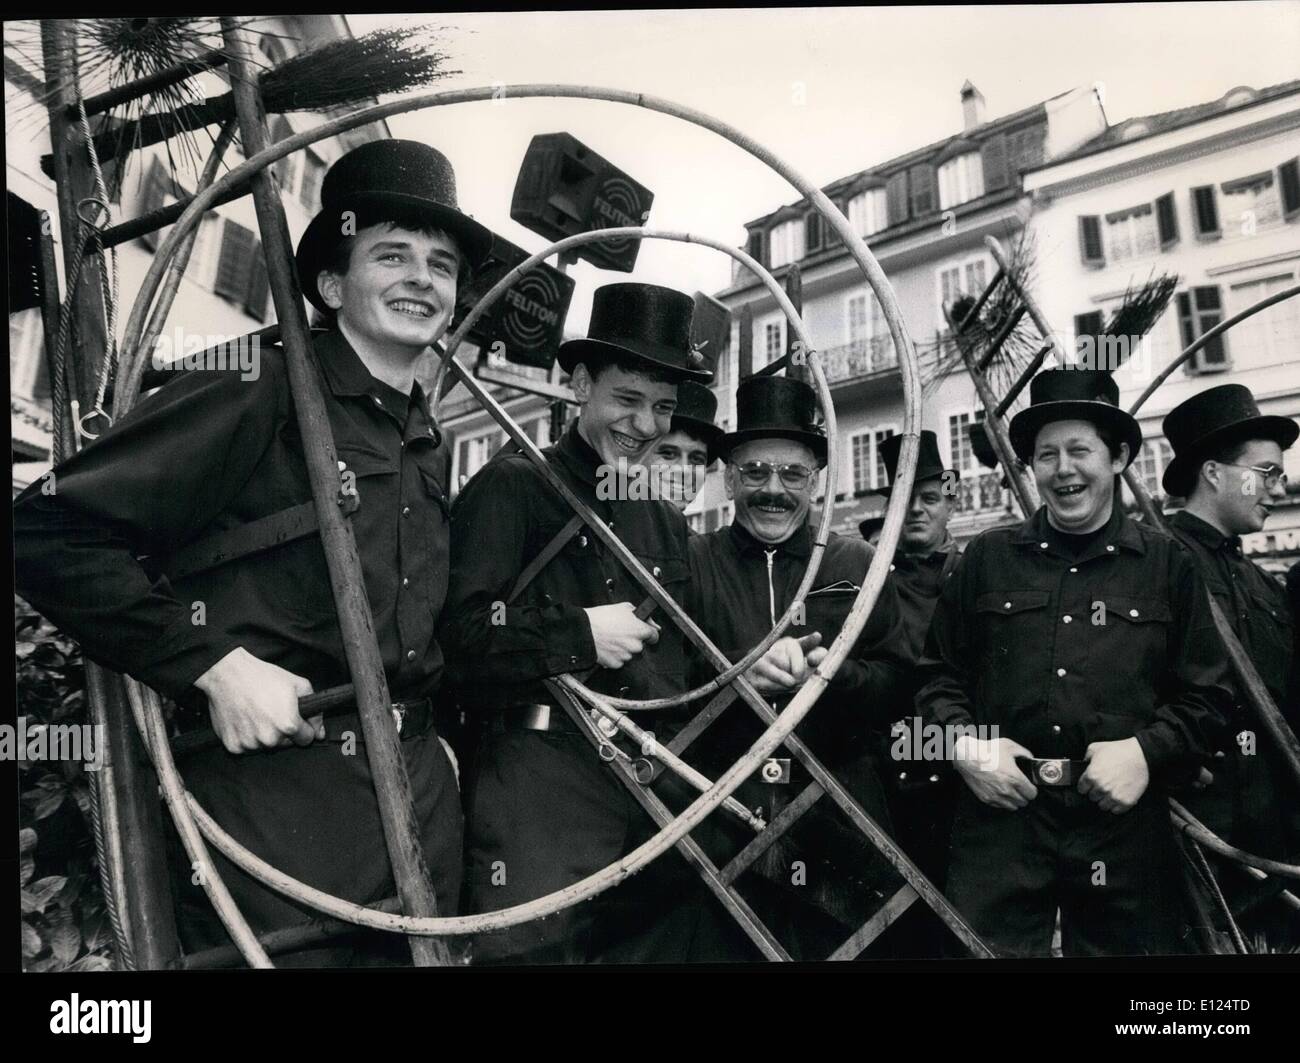 Jan. 01, 1991 - A SWEEP'S SMILE FOR SWITZERLAND All smiles are some of the 200 chimney sweeps who met on New Year's Day in Solothurn to wish Switzerland a happy 700th anniversary. Sweeps - Fortune's favourites so the saying goes are the proverbial harbingers of good luck. Stock Photo